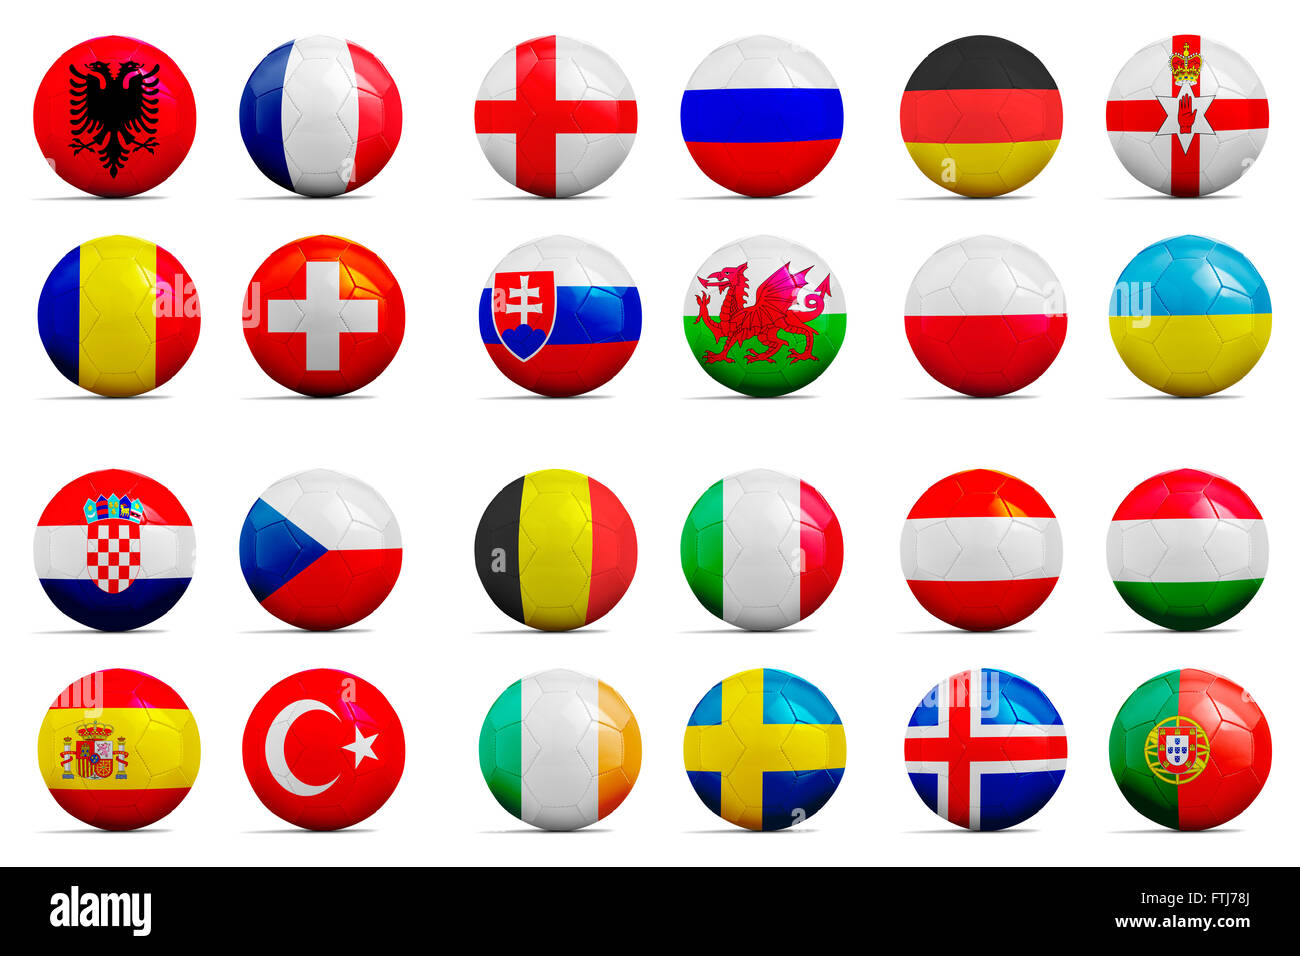 Soccer balls with groups team flags, Football Euro cup 2016. Stock Photo